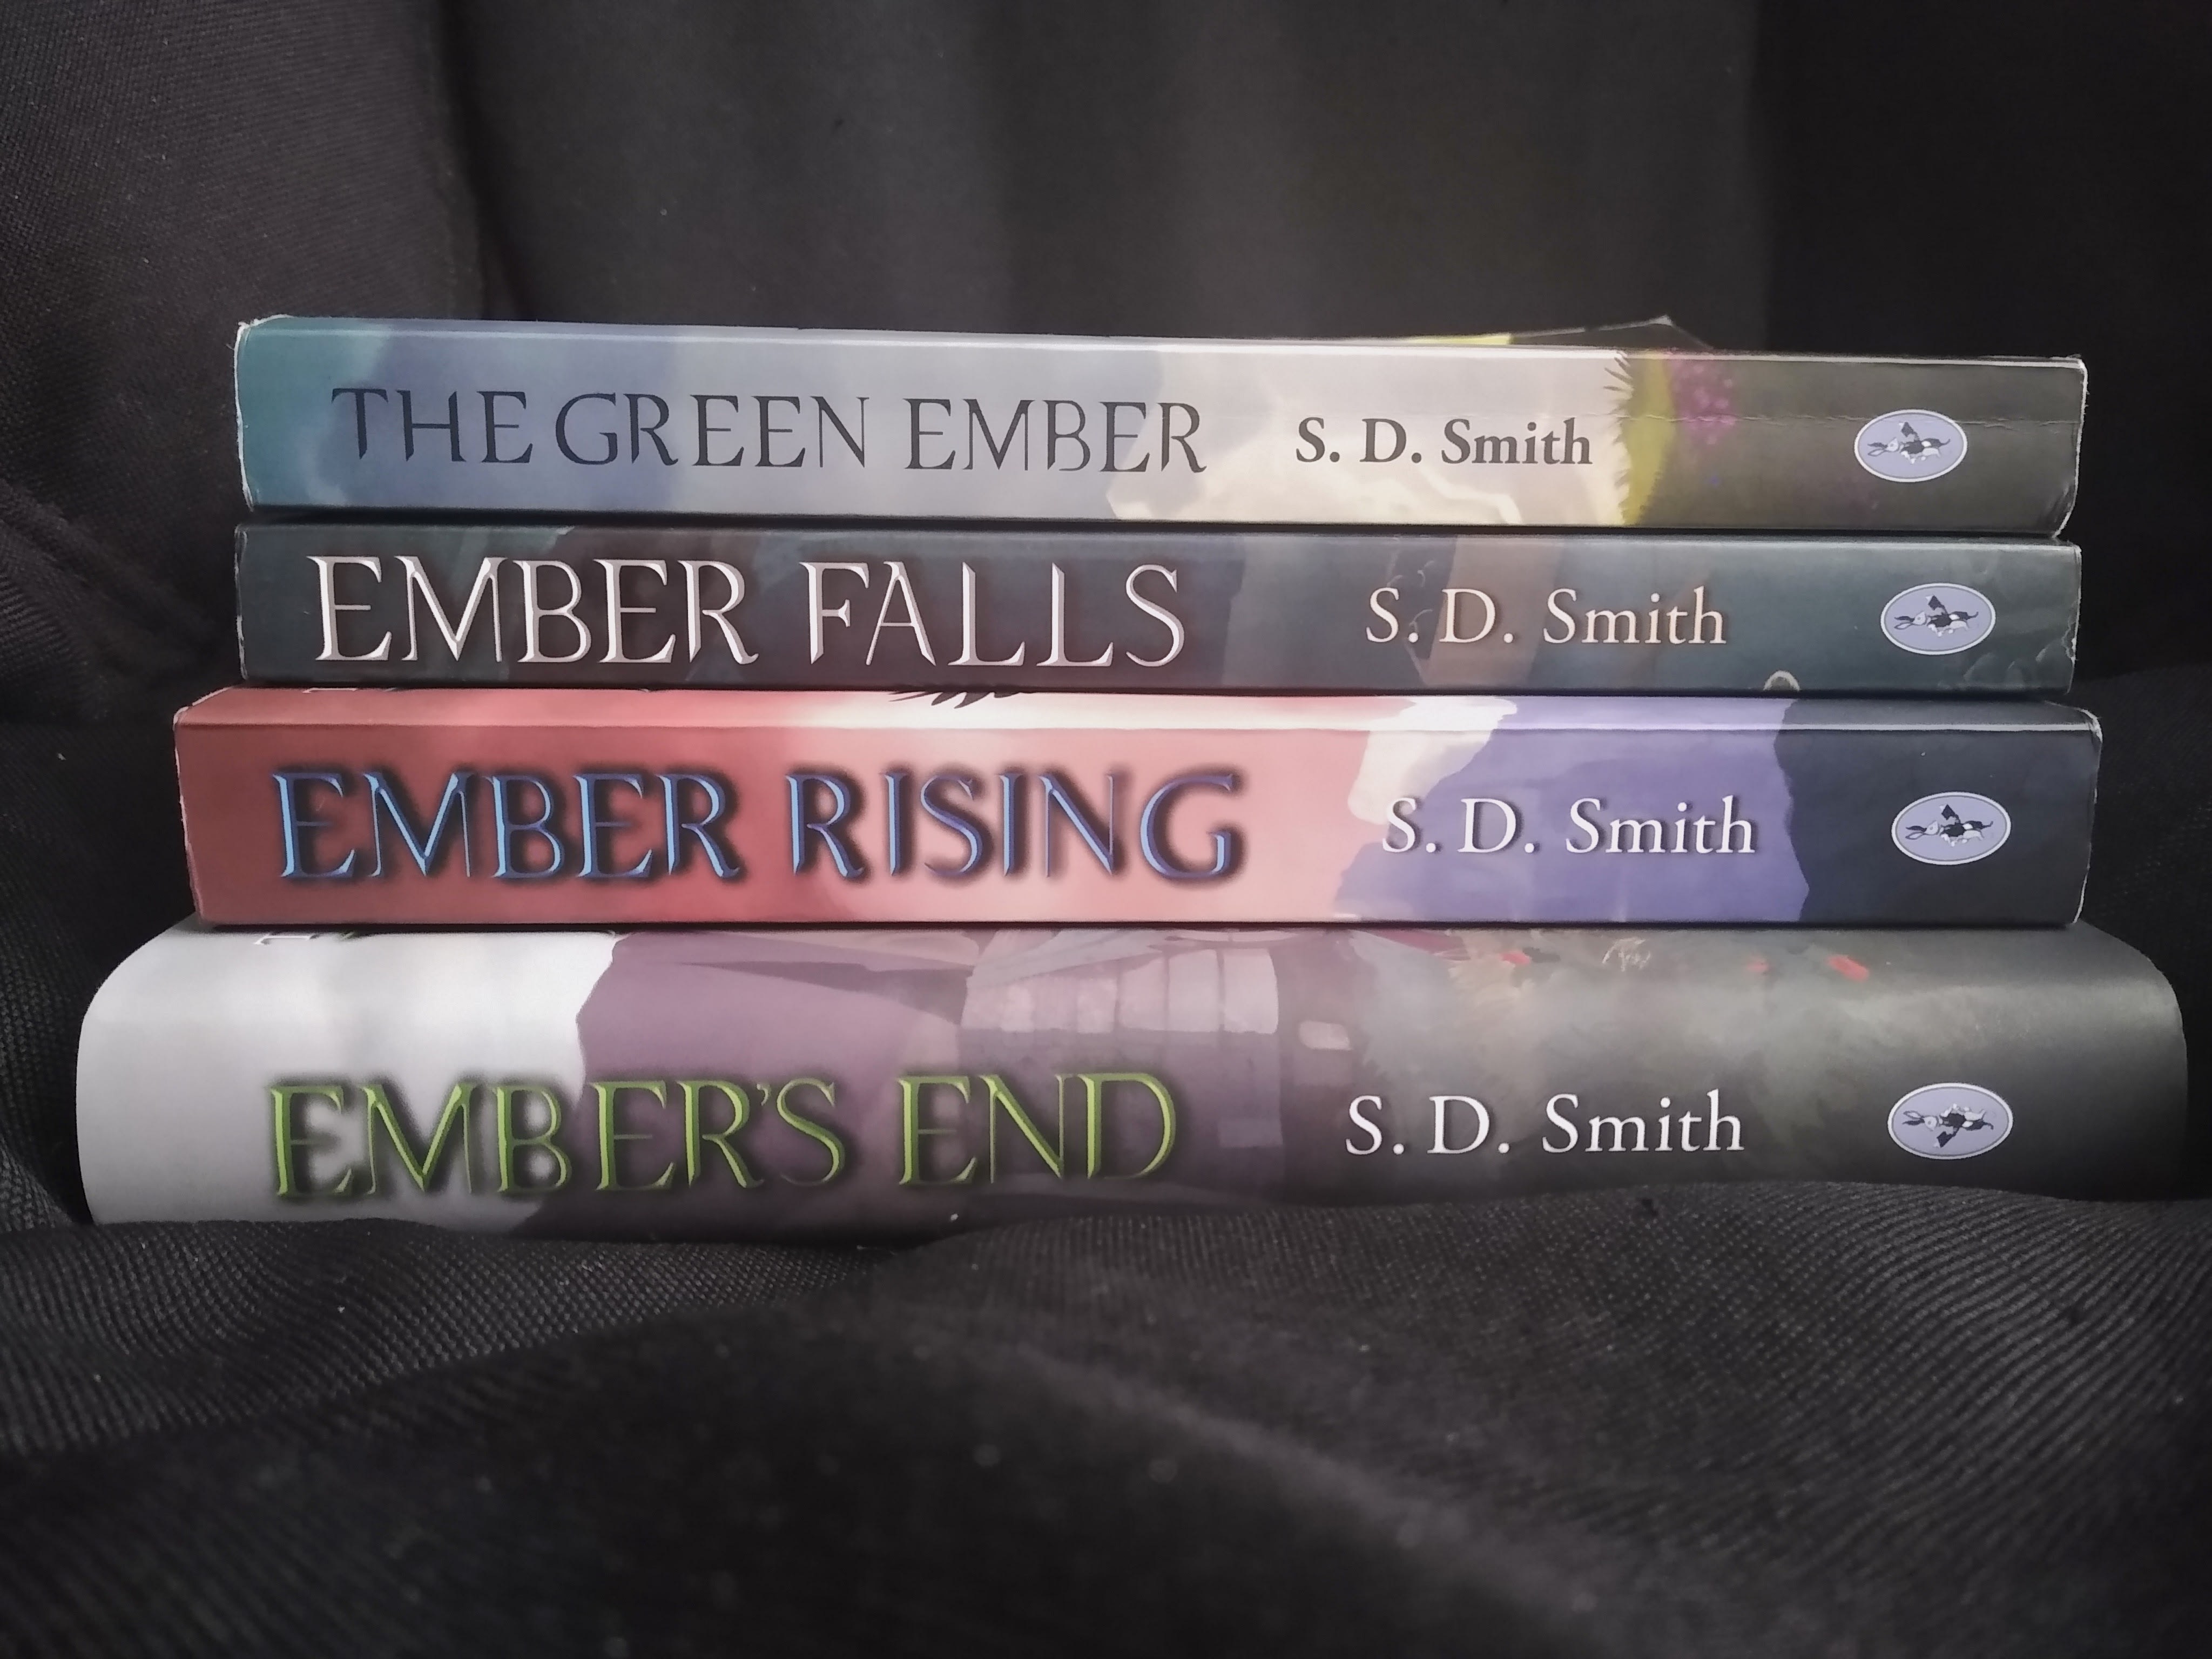 the green ember series book 4